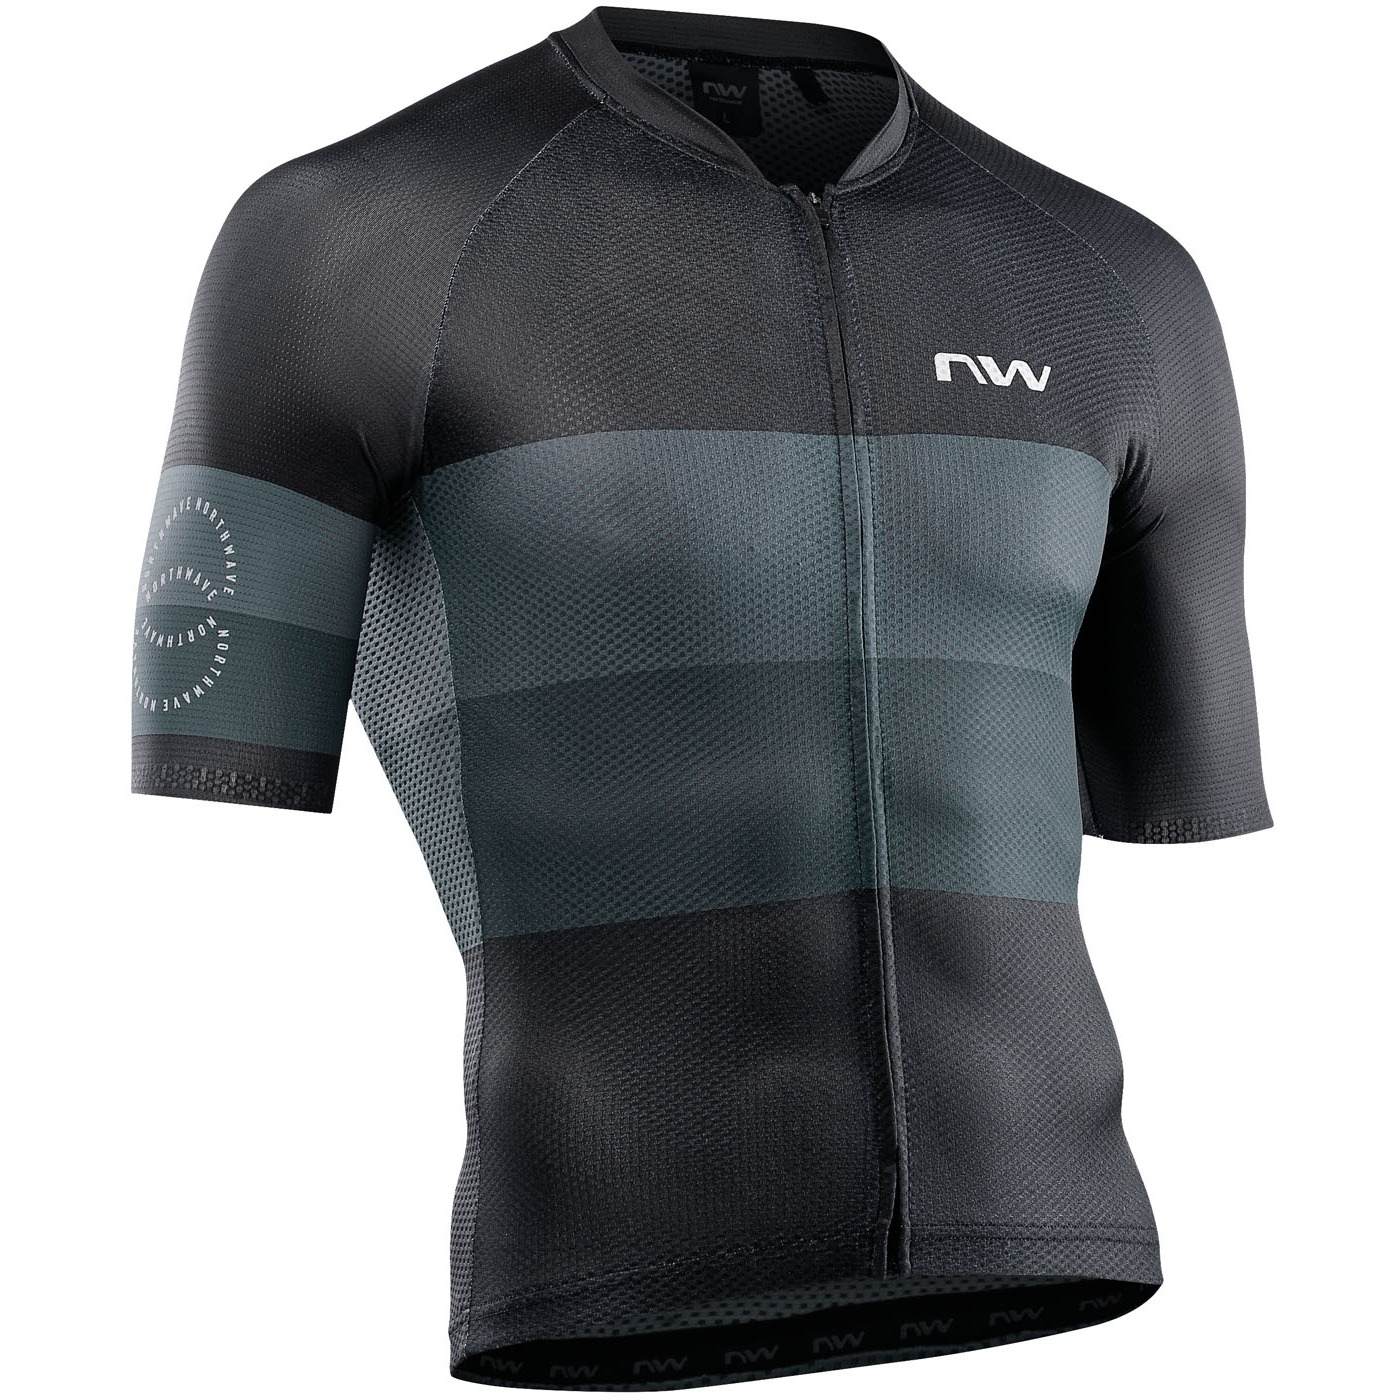 Picture of Northwave Blade Air Short Sleeve Jersey - black/light grey 03